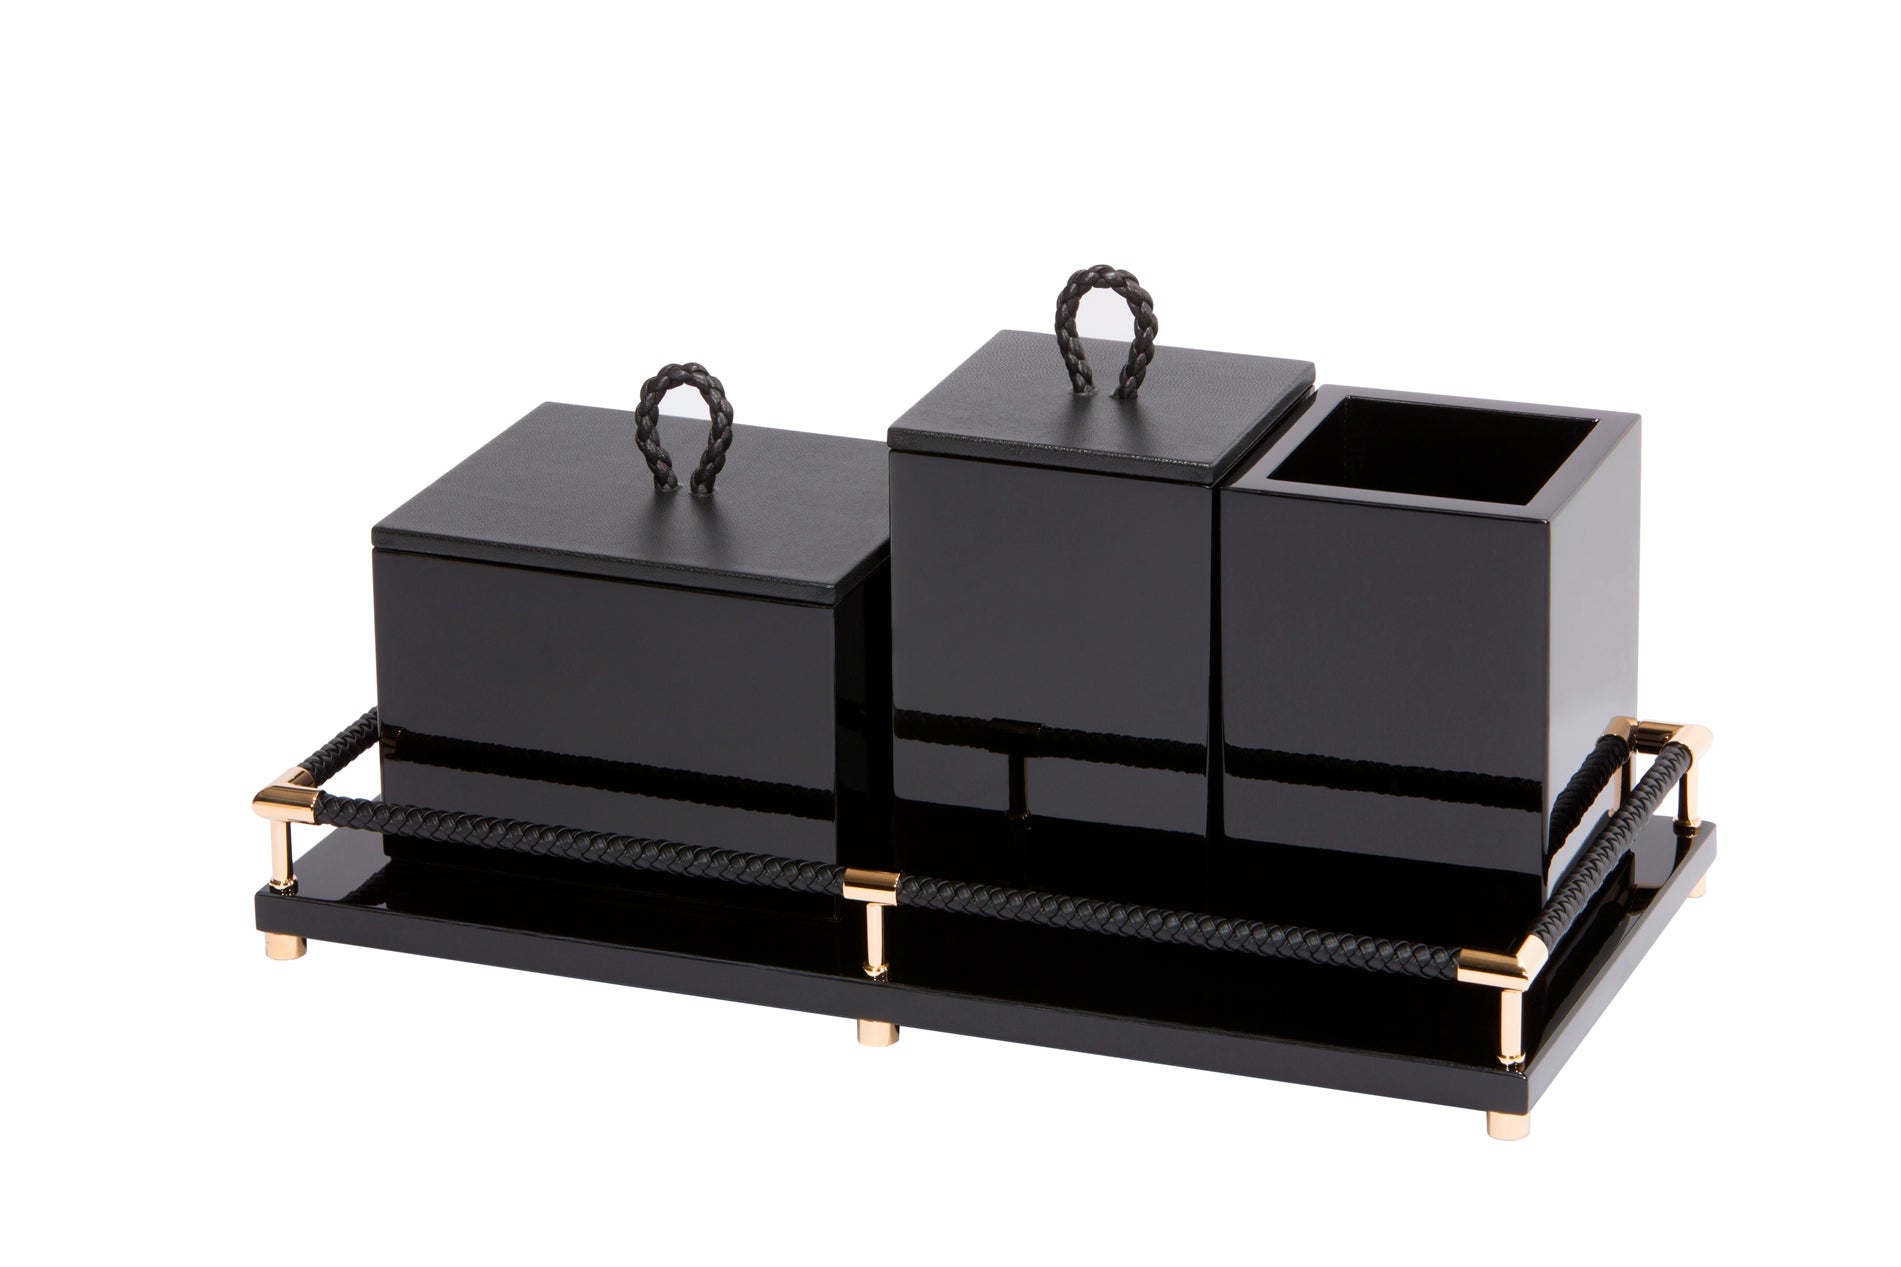 Riviere Thea Lacquered Wood Trinket Container Box with Leather Lid | Stylish Storage Solution | Elegant Design | Perfect for Storing Small Items | Ideal for Yacht Accessories Decor | Explore More Luxury Home Accessories at 2Jour Concierge, #1 luxury high-end gift & lifestyle shop